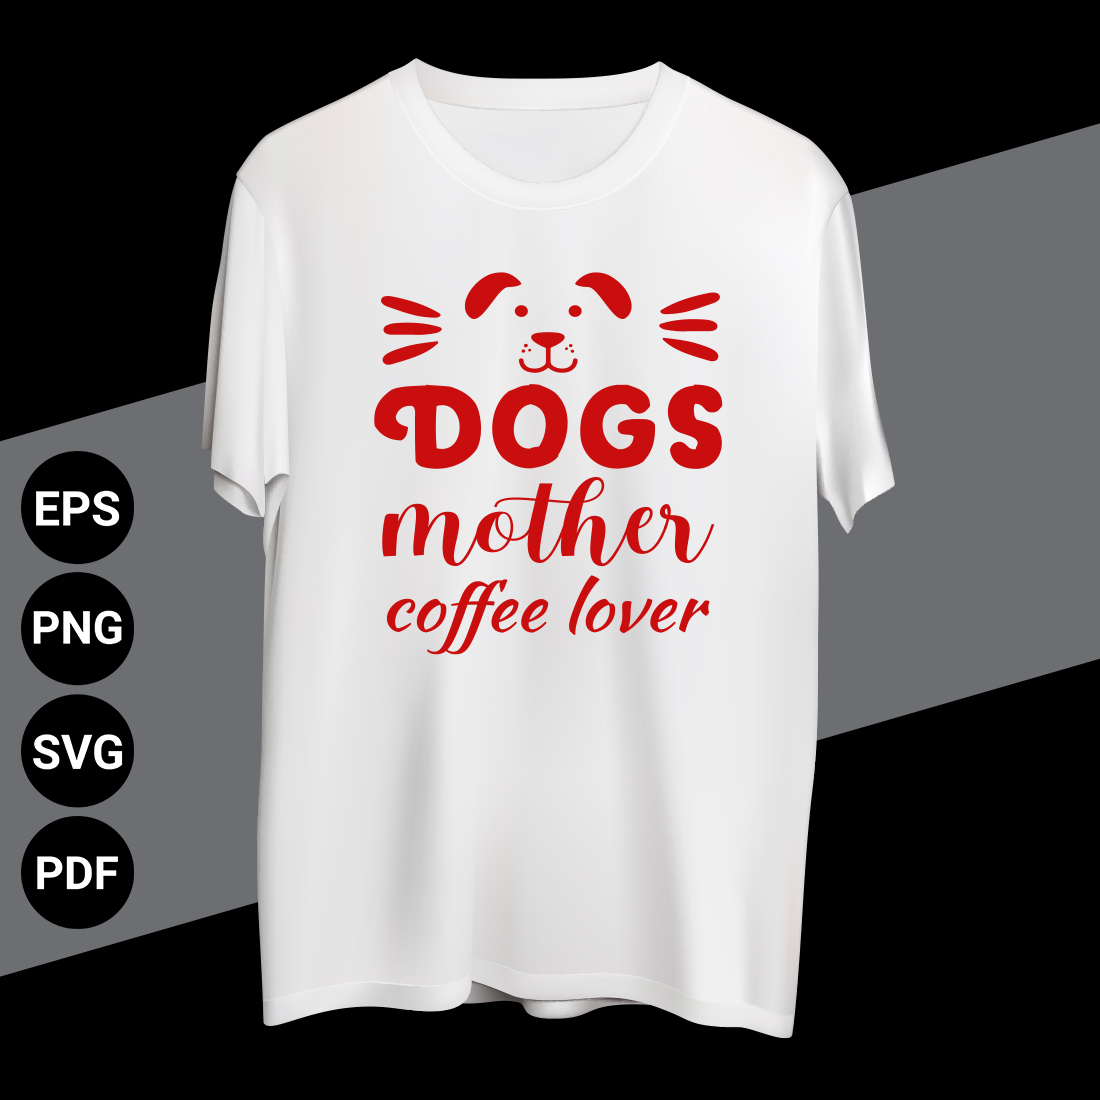 Dog Mother Coffee Lover T-shirt design cover image.